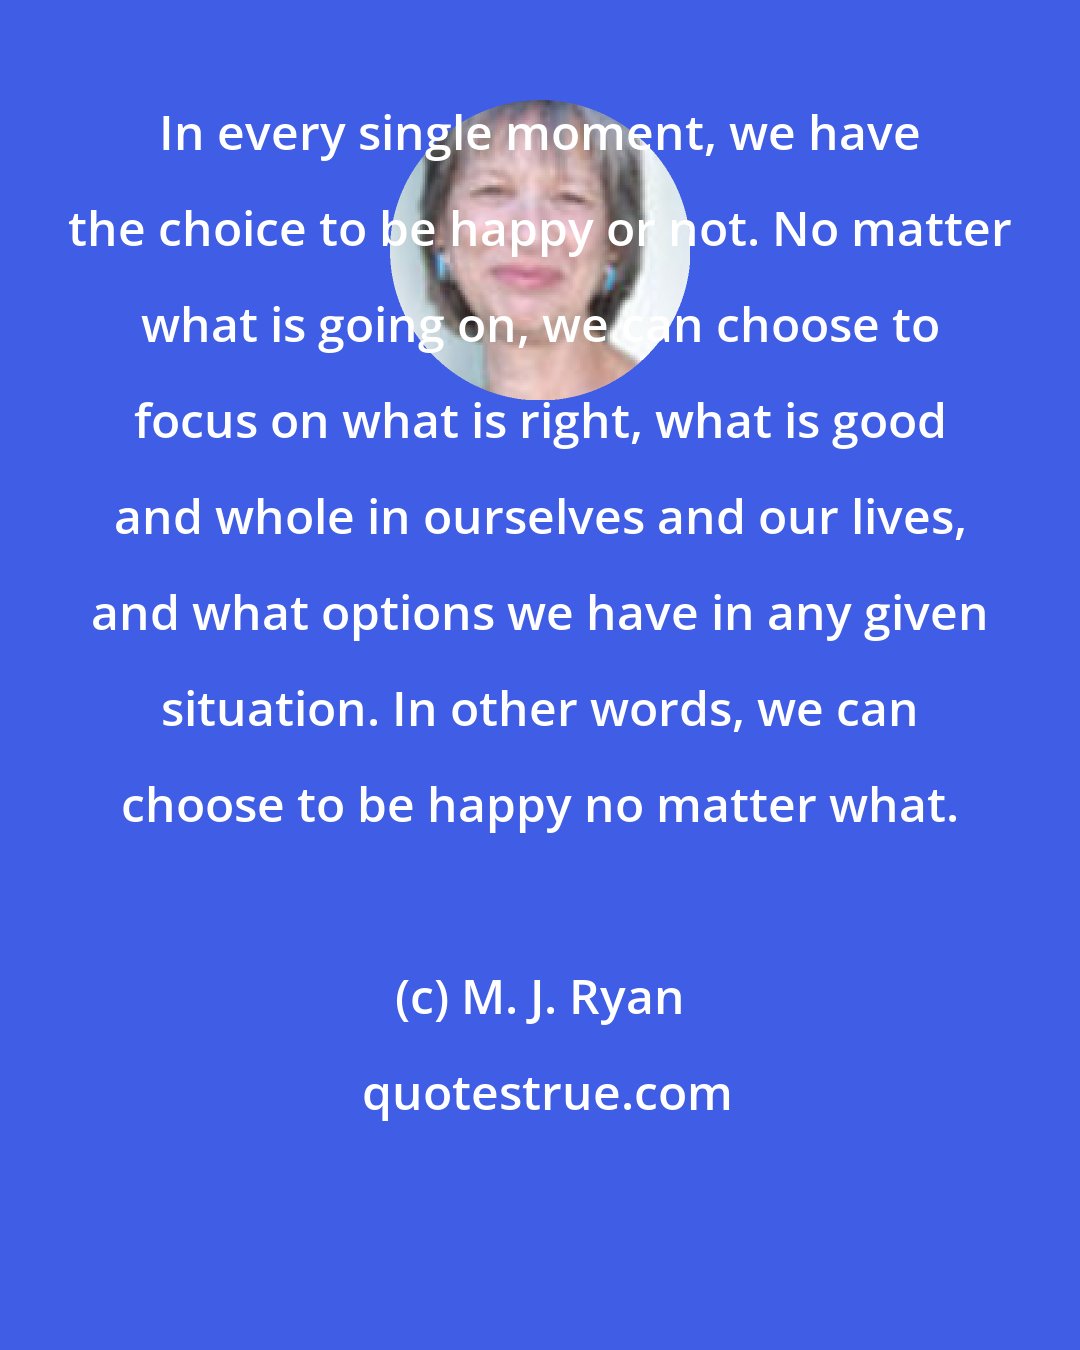 M. J. Ryan: In every single moment, we have the choice to be happy or not. No matter what is going on, we can choose to focus on what is right, what is good and whole in ourselves and our lives, and what options we have in any given situation. In other words, we can choose to be happy no matter what.